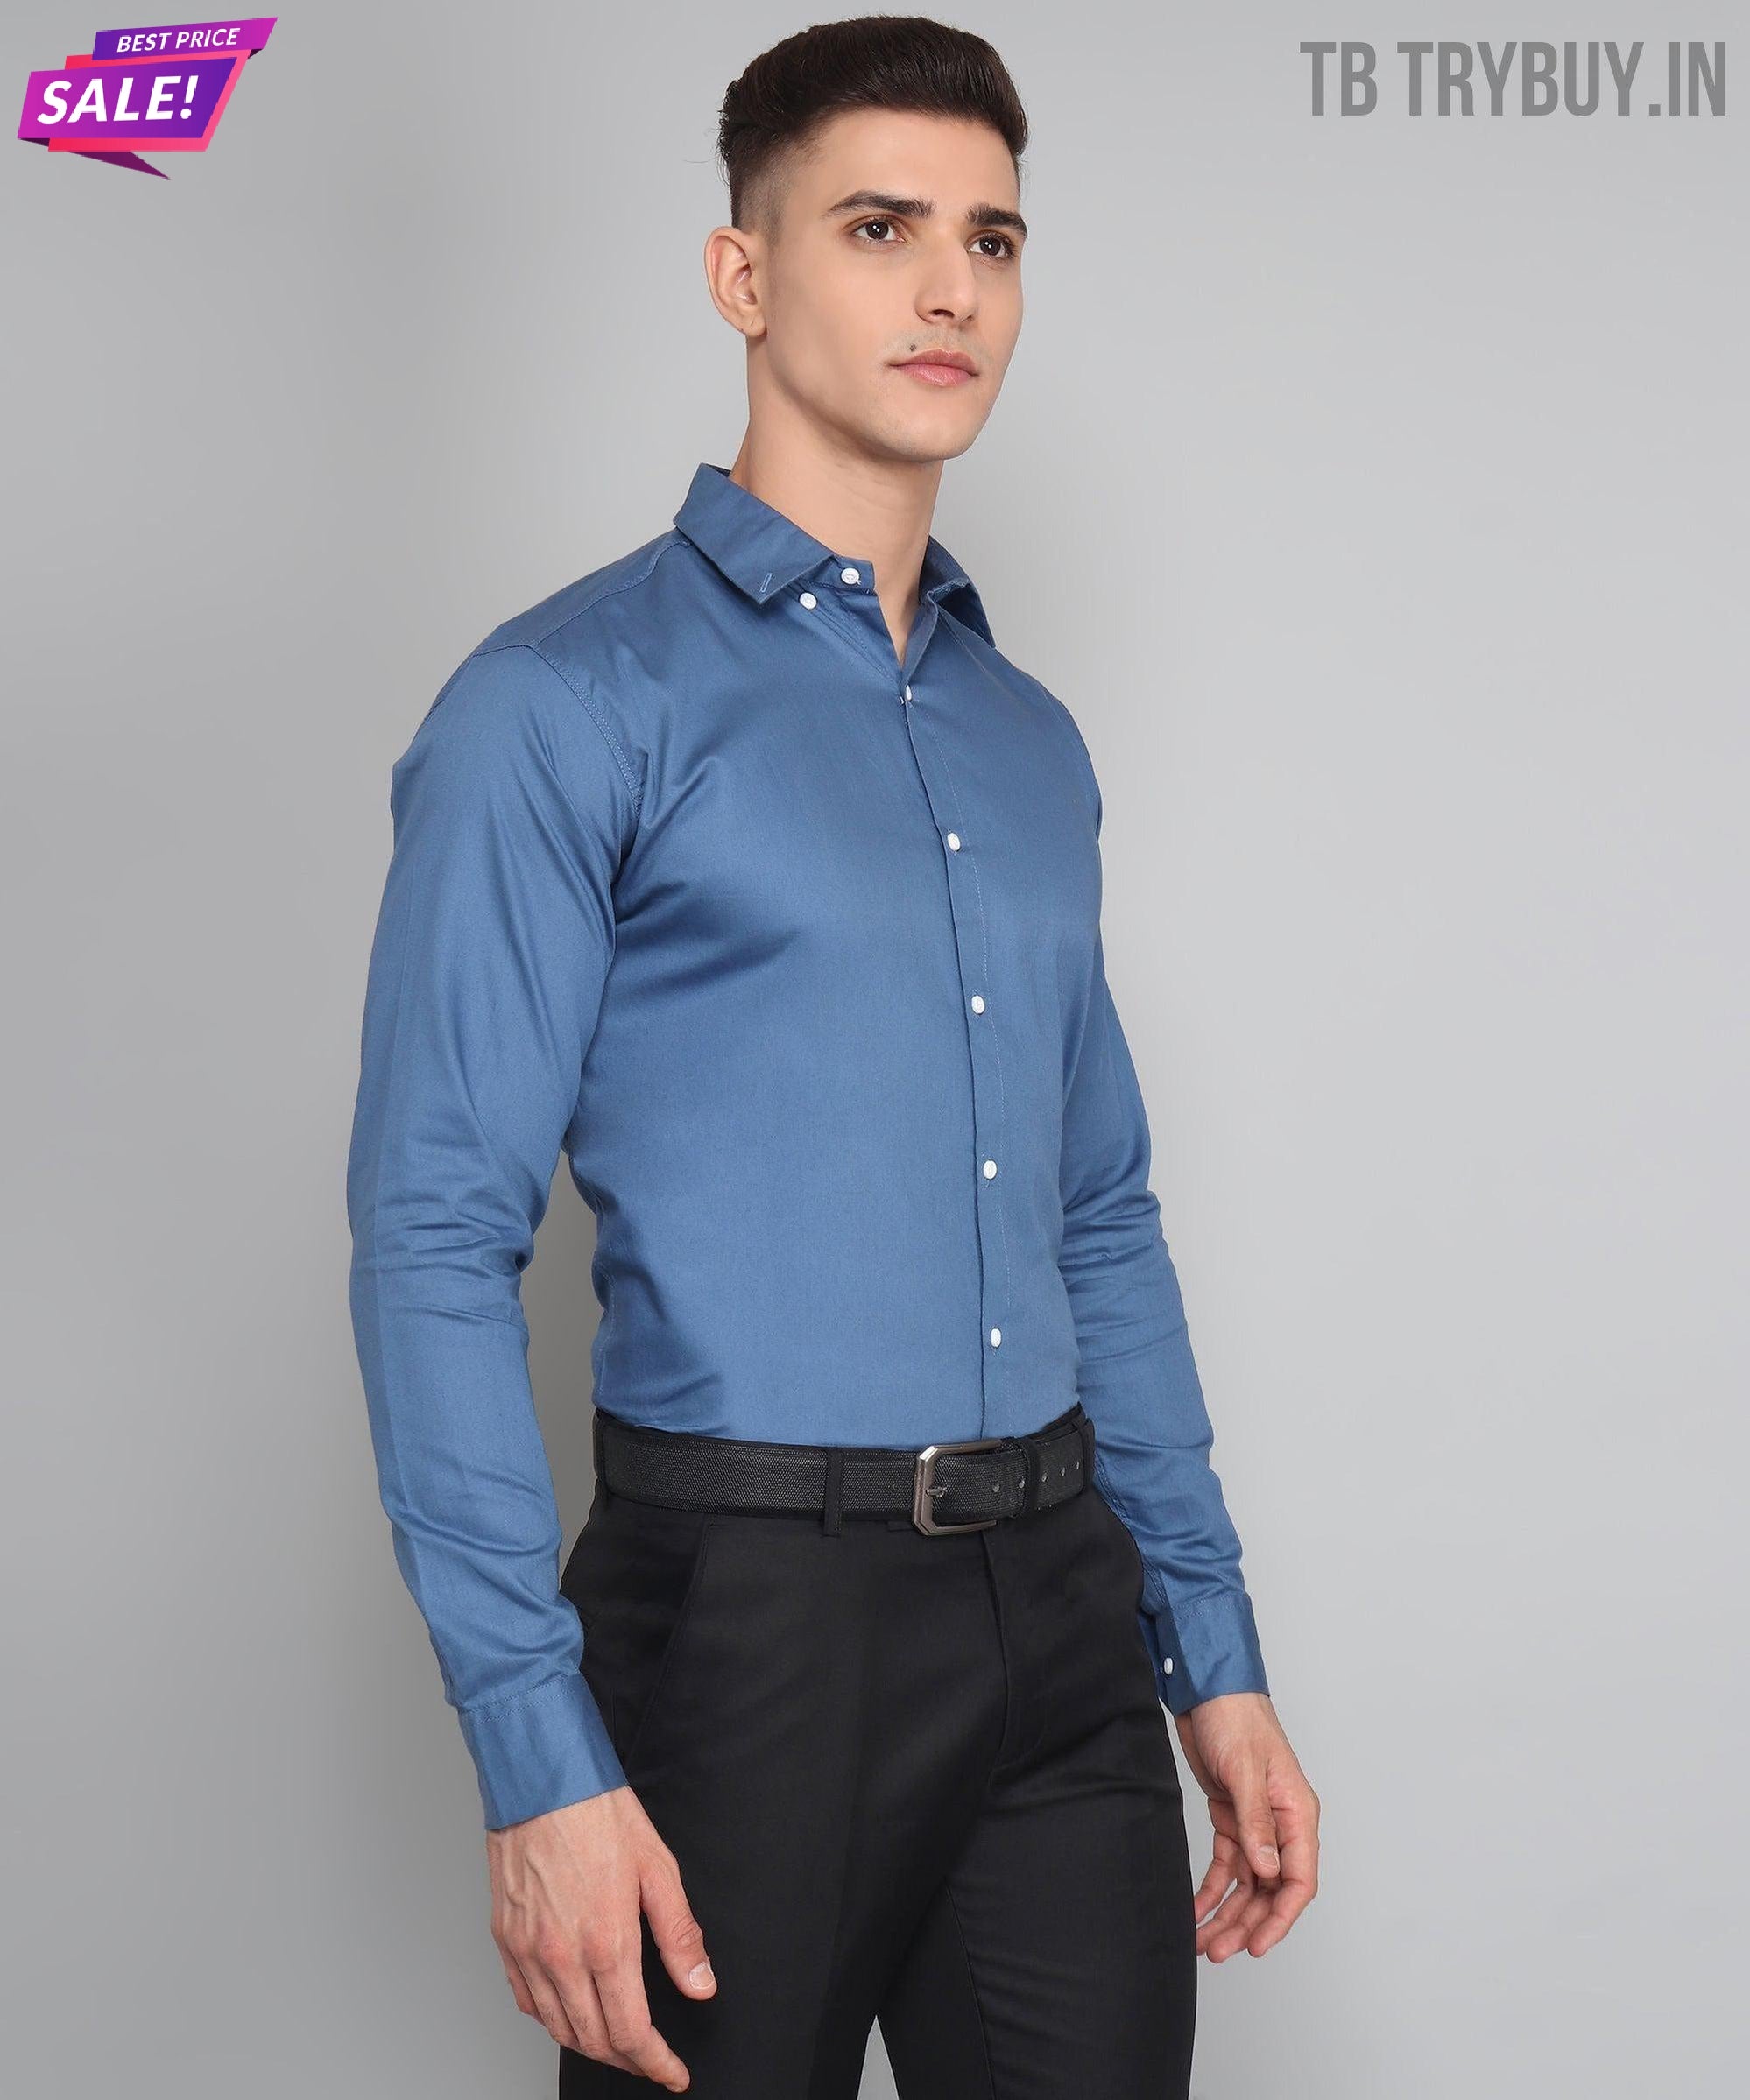 Exclusive TryBuy Premium Blue Casual/Formal Shirt for Men